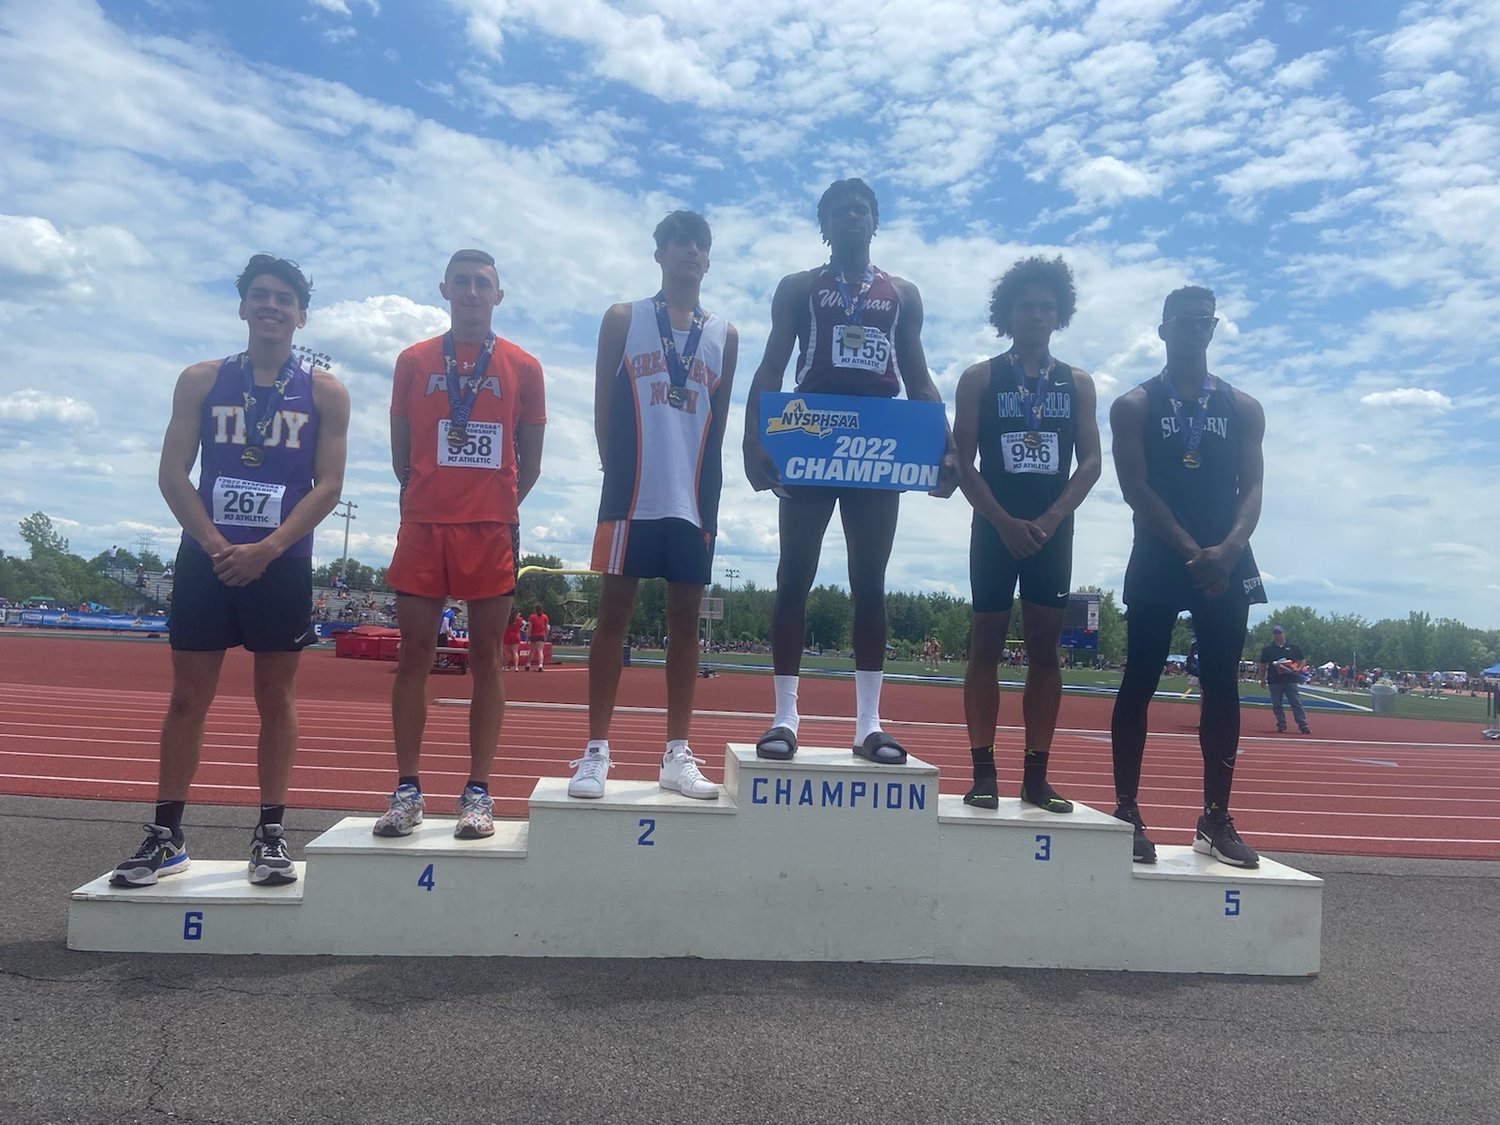 Rome Free Academy senior Edward Rakowski, second from left, was fourth in the state and fifth in Federations in high jump in the event at Cicero-North Syracuse High School.